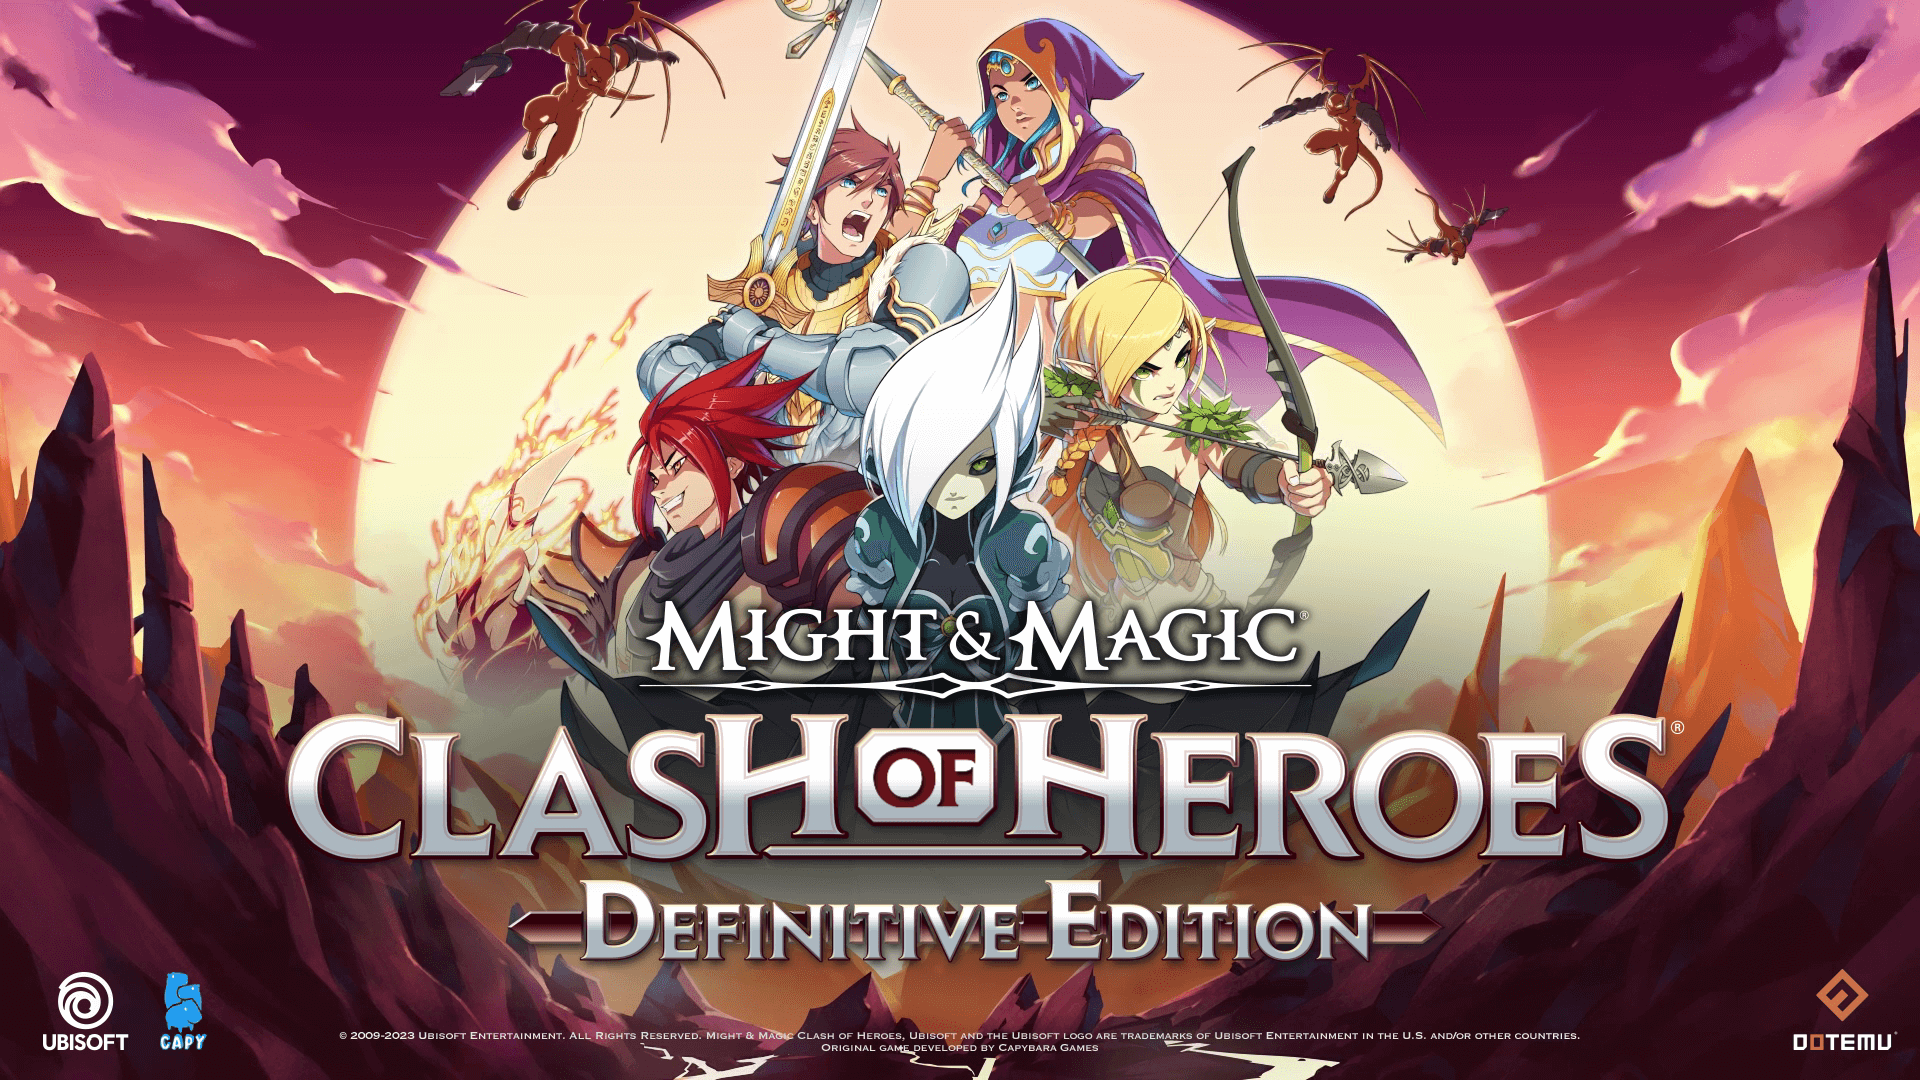 Might & Magic: Clash of Heroes – Definitive Edition casts a spell on PC and consoles this summer by Dotemu